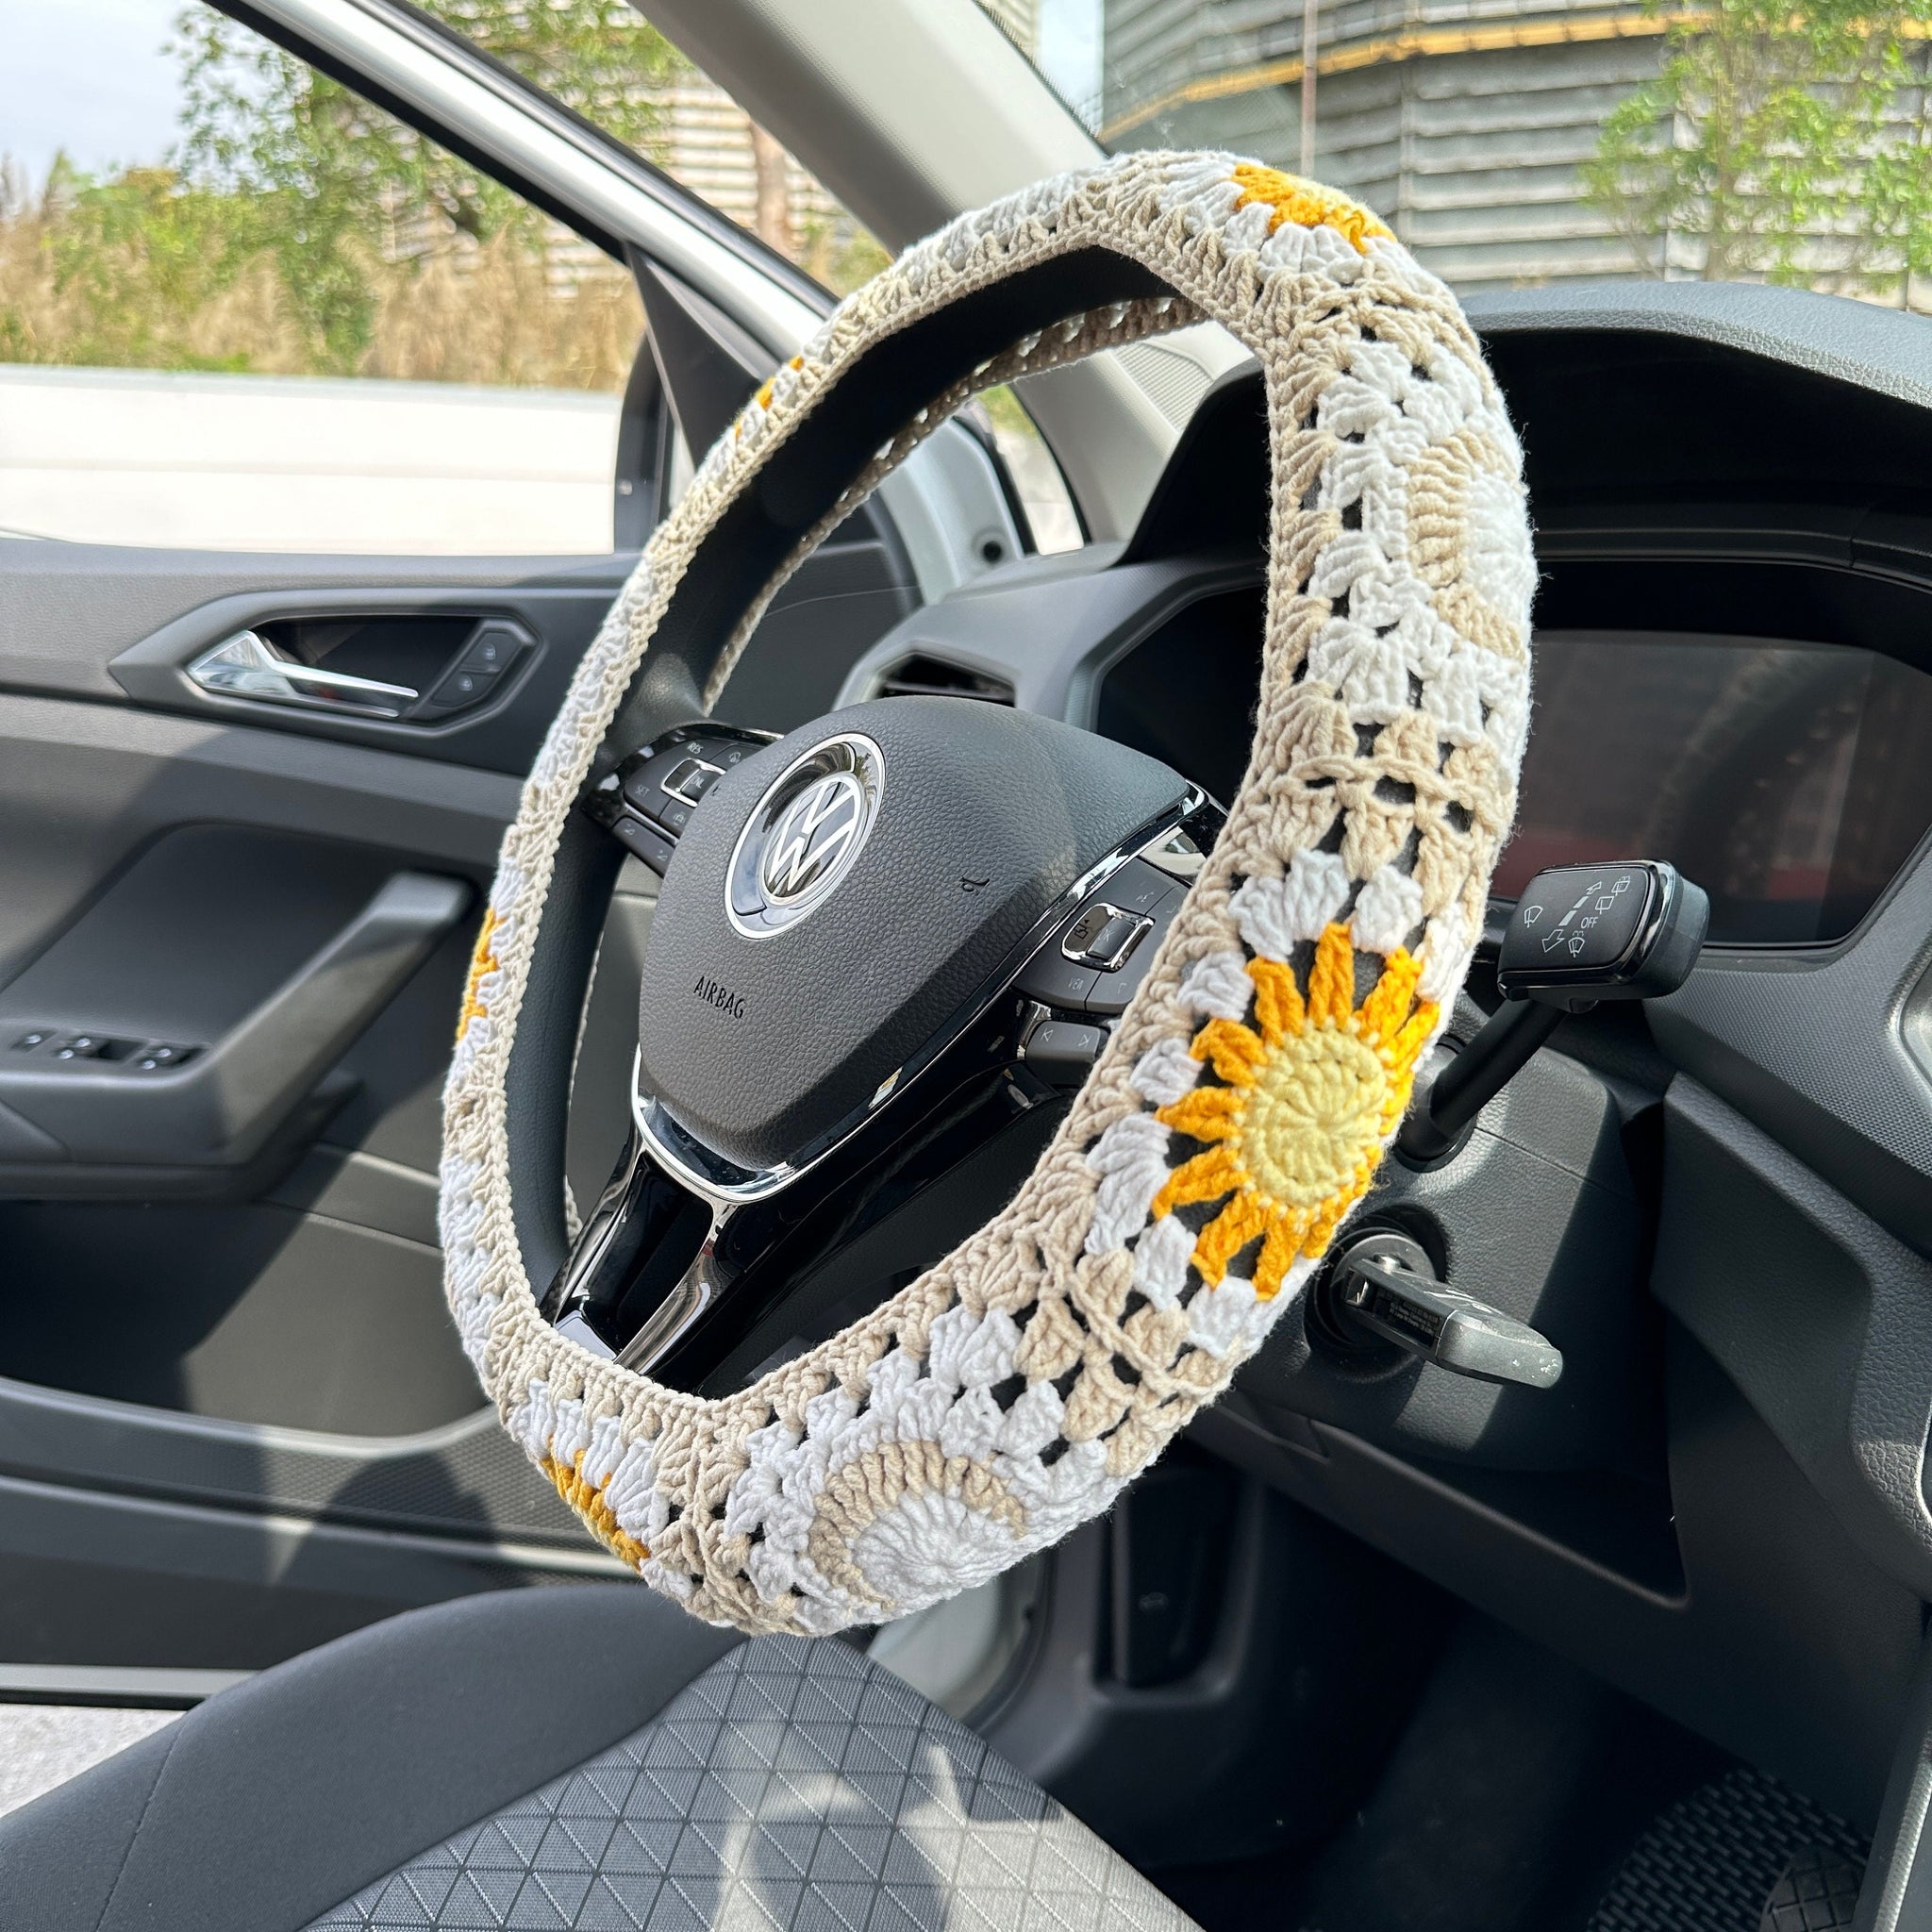 Sun and Moon car steering wheel cover,Sun and moon design,Steering wheel cover,Seat belt Cover,Car Accessories,New car gift